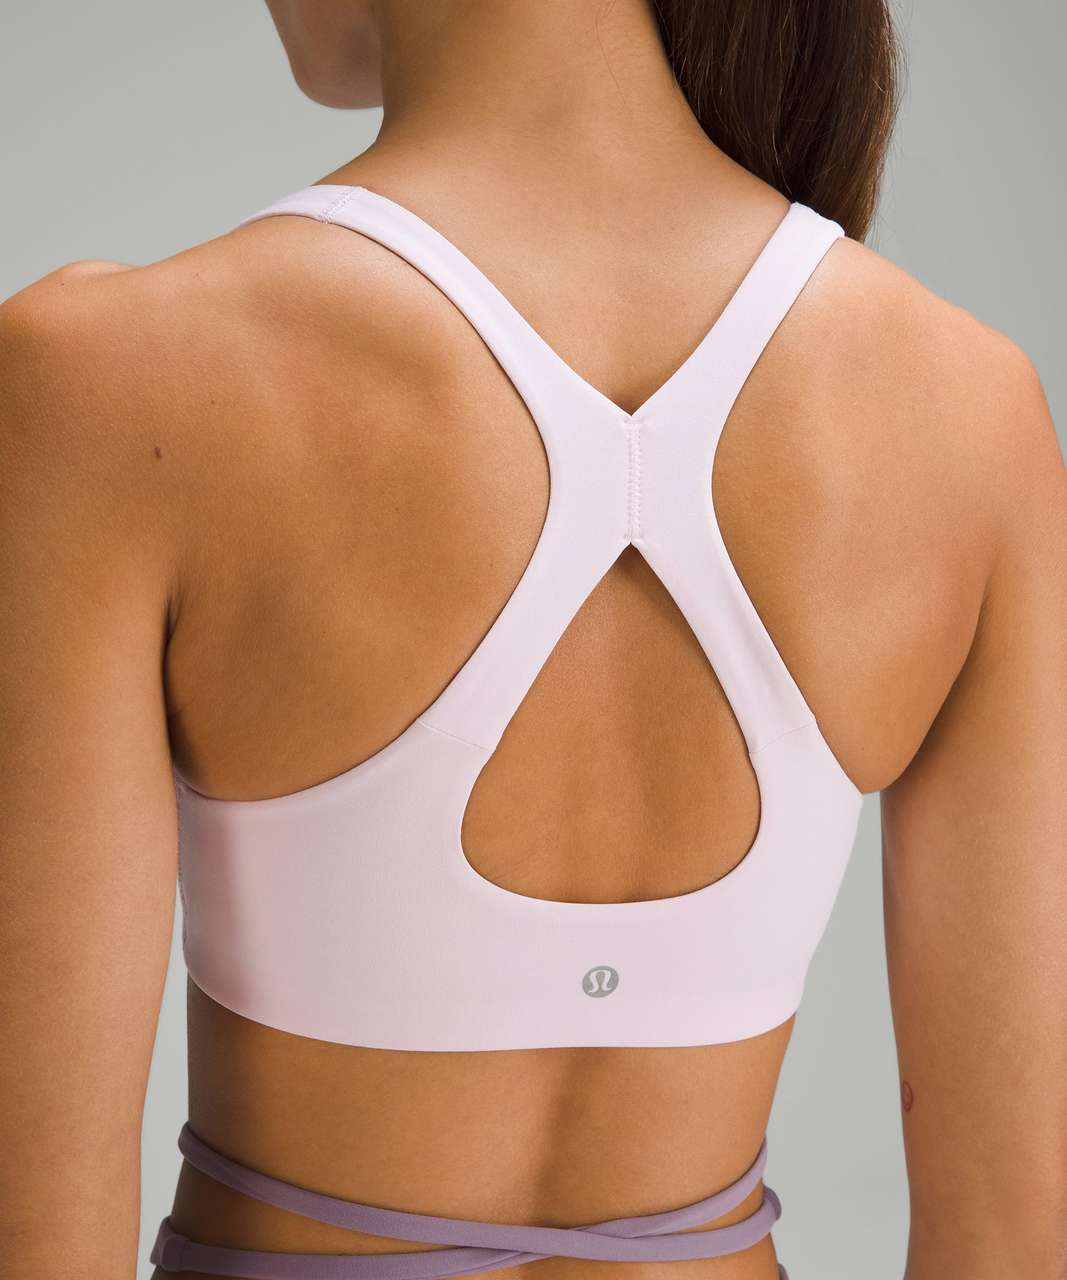 Lululemon SmoothCover Yoga Bra *Light Support, B/C Cup - Meadowsweet Pink